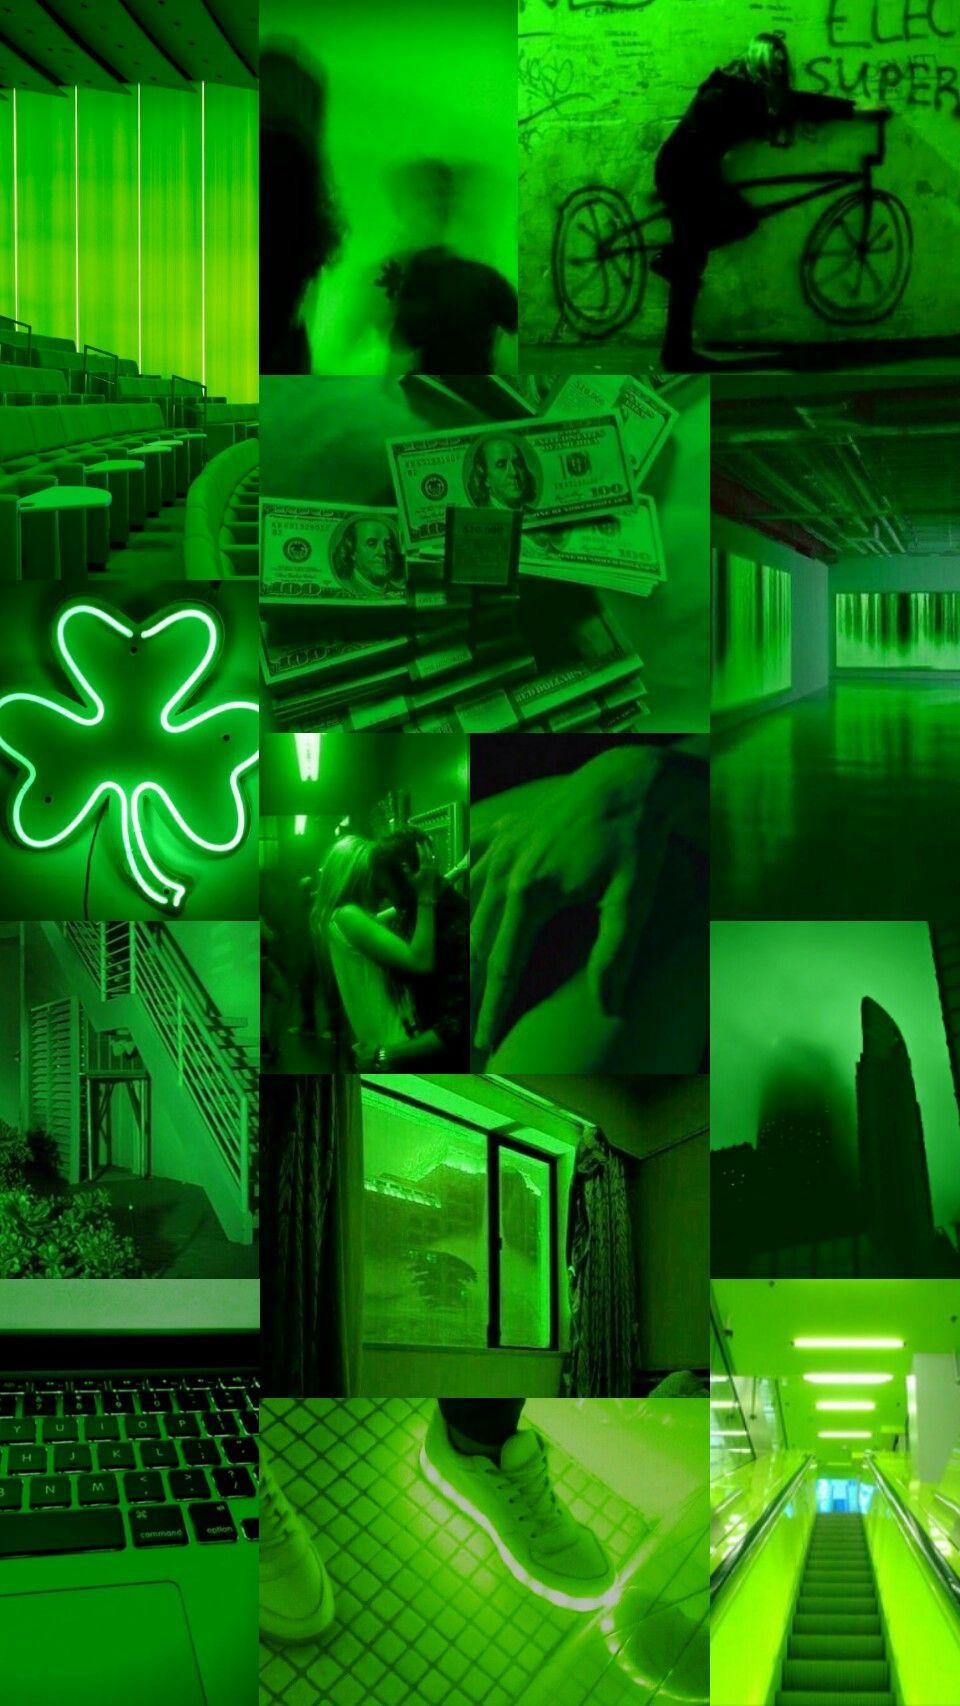 Aesthetic green collage background with neon lights, money, and a city - Green, lime green, neon green